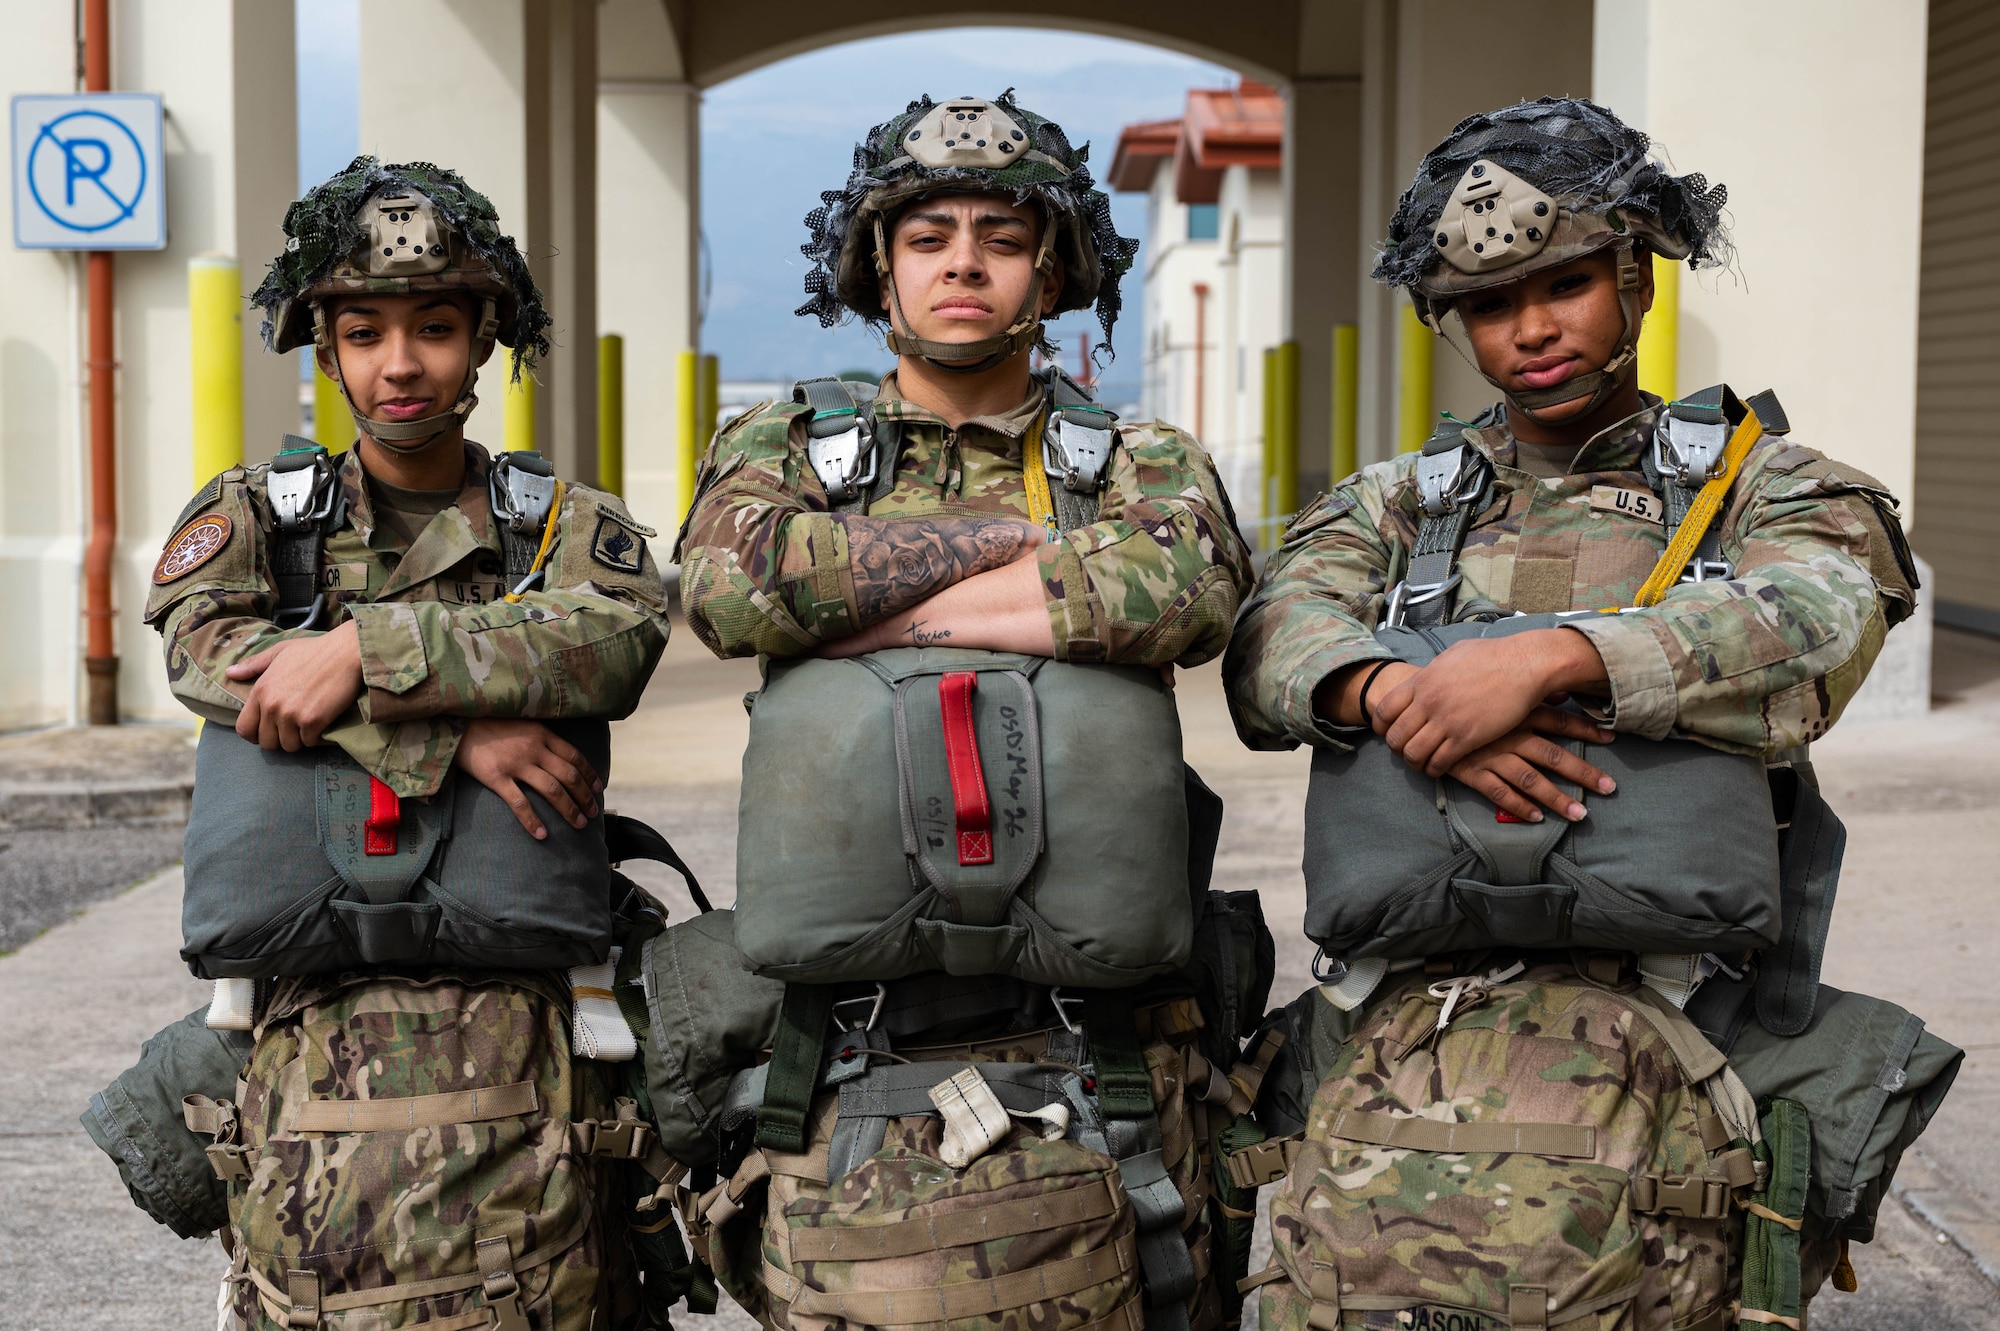 U.S. Army Soldiers pose for a photo.